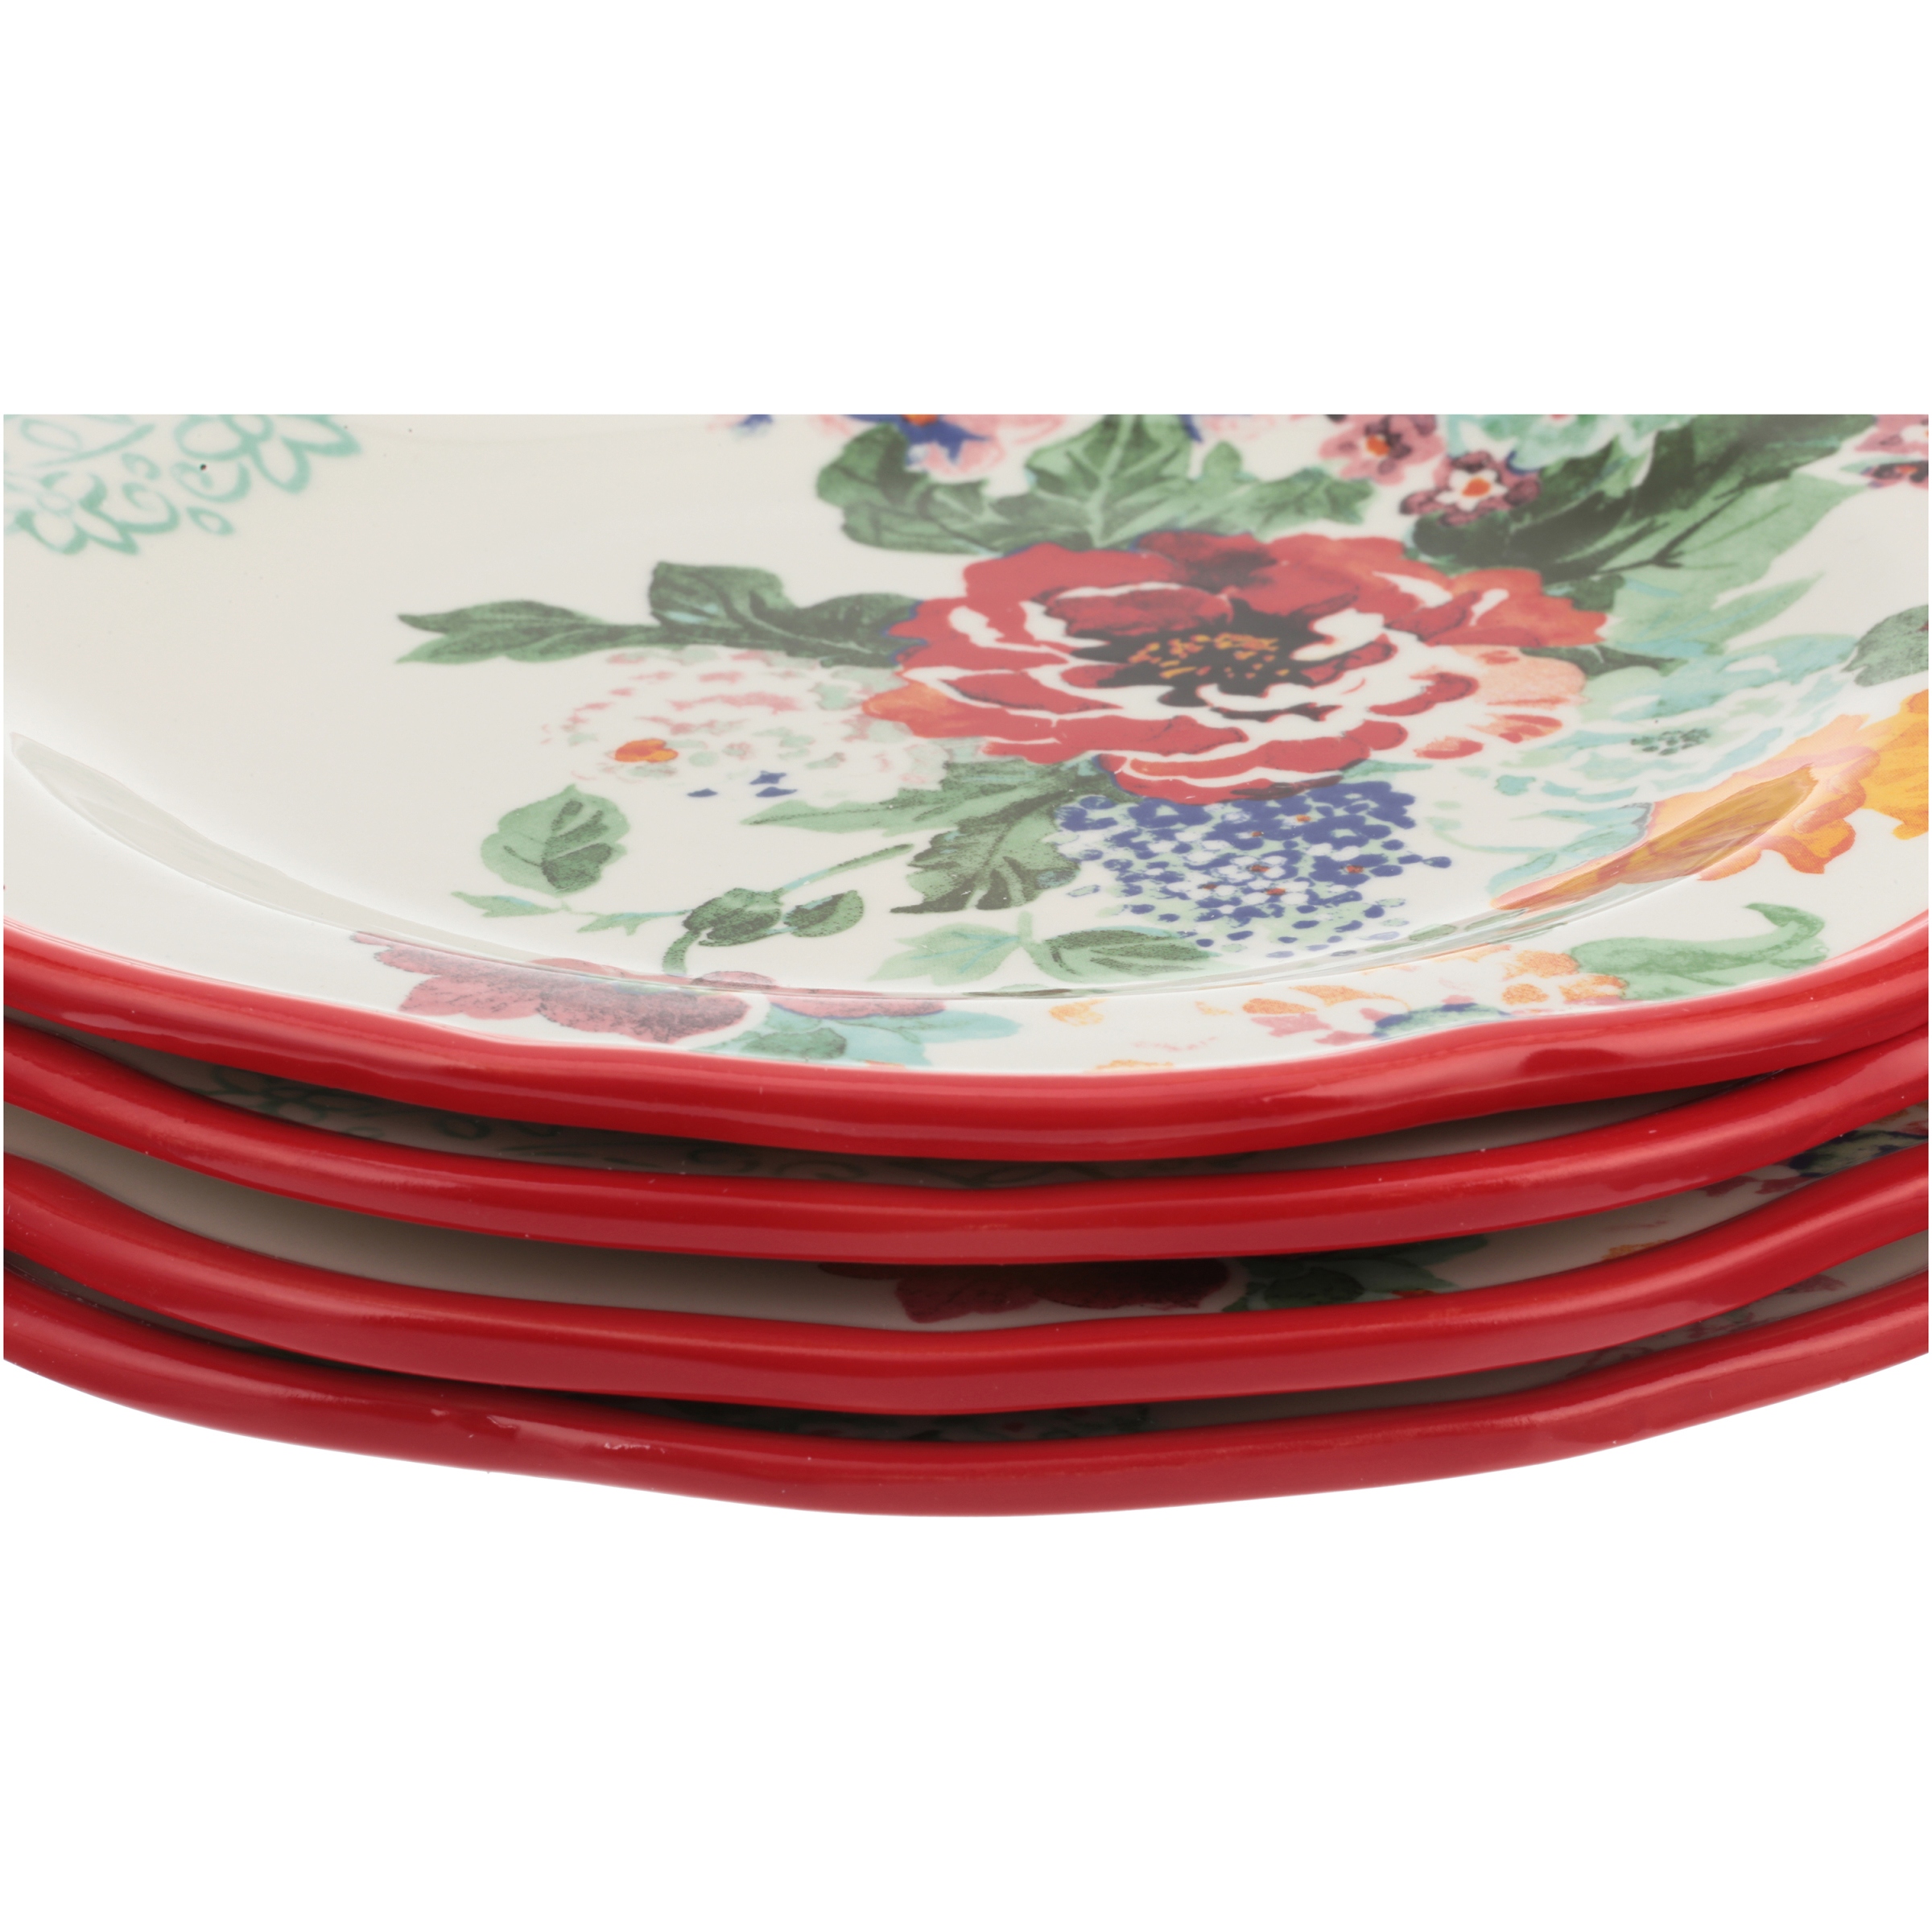 The Pioneer Woman Country Garden 4-Piece Salad Plate Set - image 3 of 4